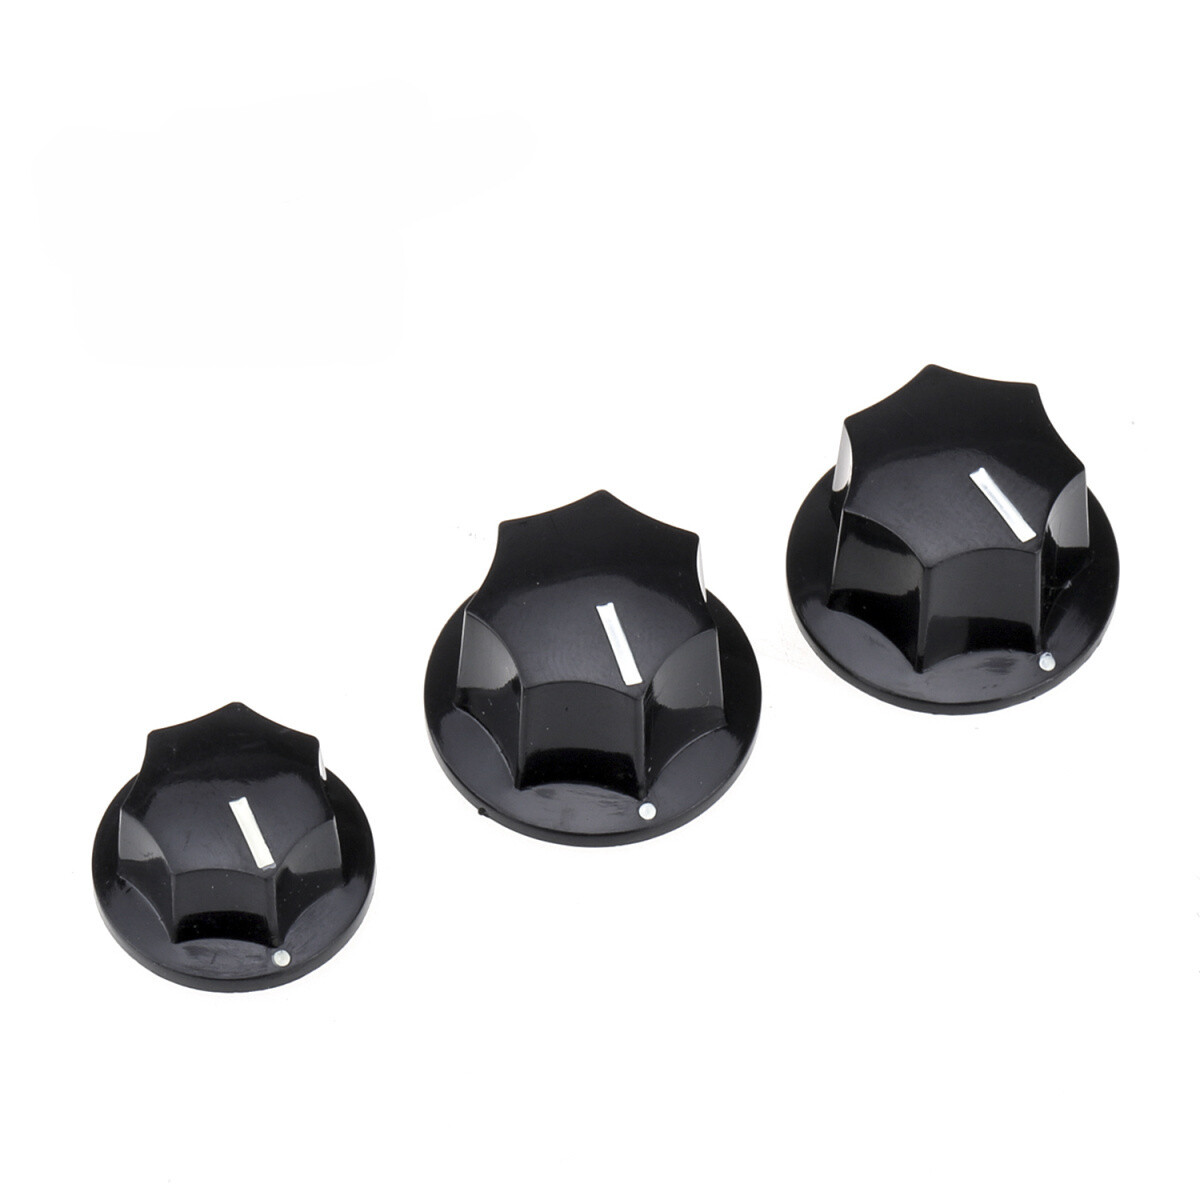 Brio US CTS Bourns Size 2 Large 1 Small Jazz Bass Knobs Set for USA Made JB Style Bass, Black